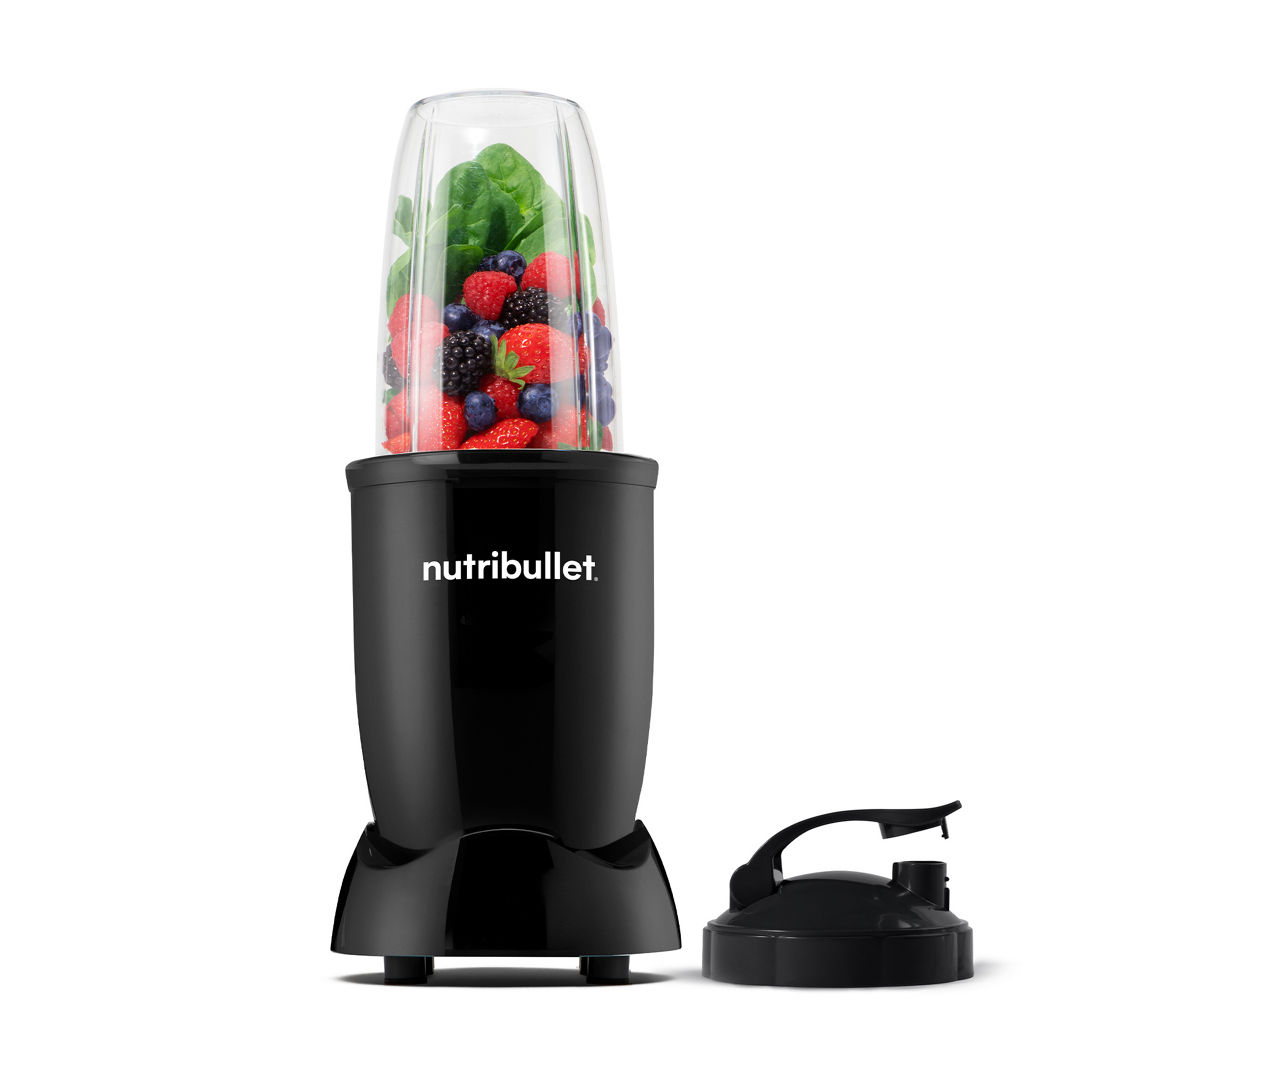 The Nutribullet Blender I'm Obsessed With Is on Sale for Just $79